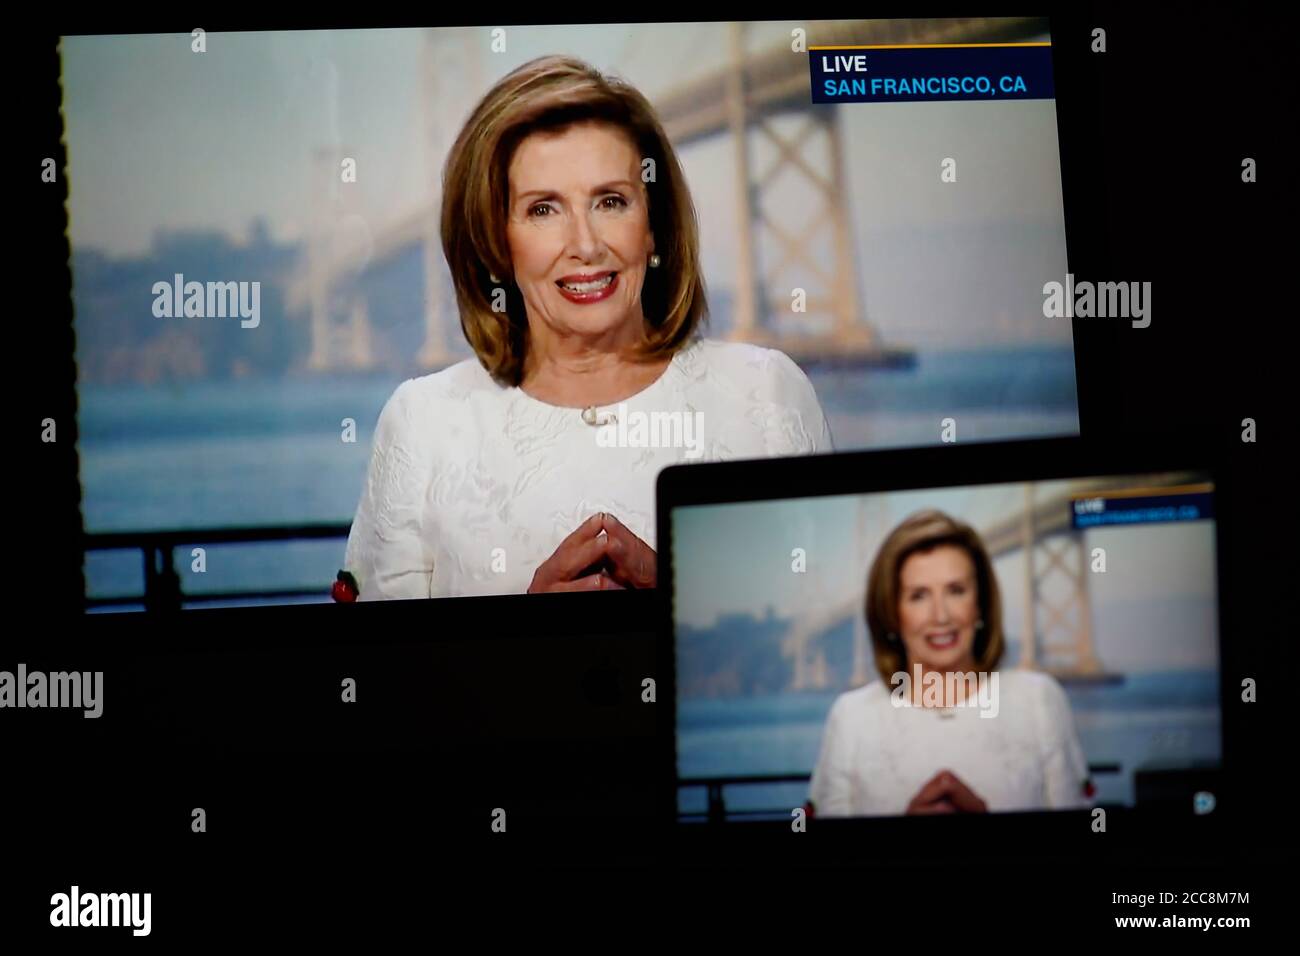 Washington, USA. 20th Aug, 2020. Images of U.S. House Speaker Nancy Pelosi speaking in a video feed of the 2020 Democratic National Convention are displayed on screens in Arlington, Virginia, the United States, on Aug. 19, 2020. Credit: Liu Jie/Xinhua/Alamy Live News Stock Photo